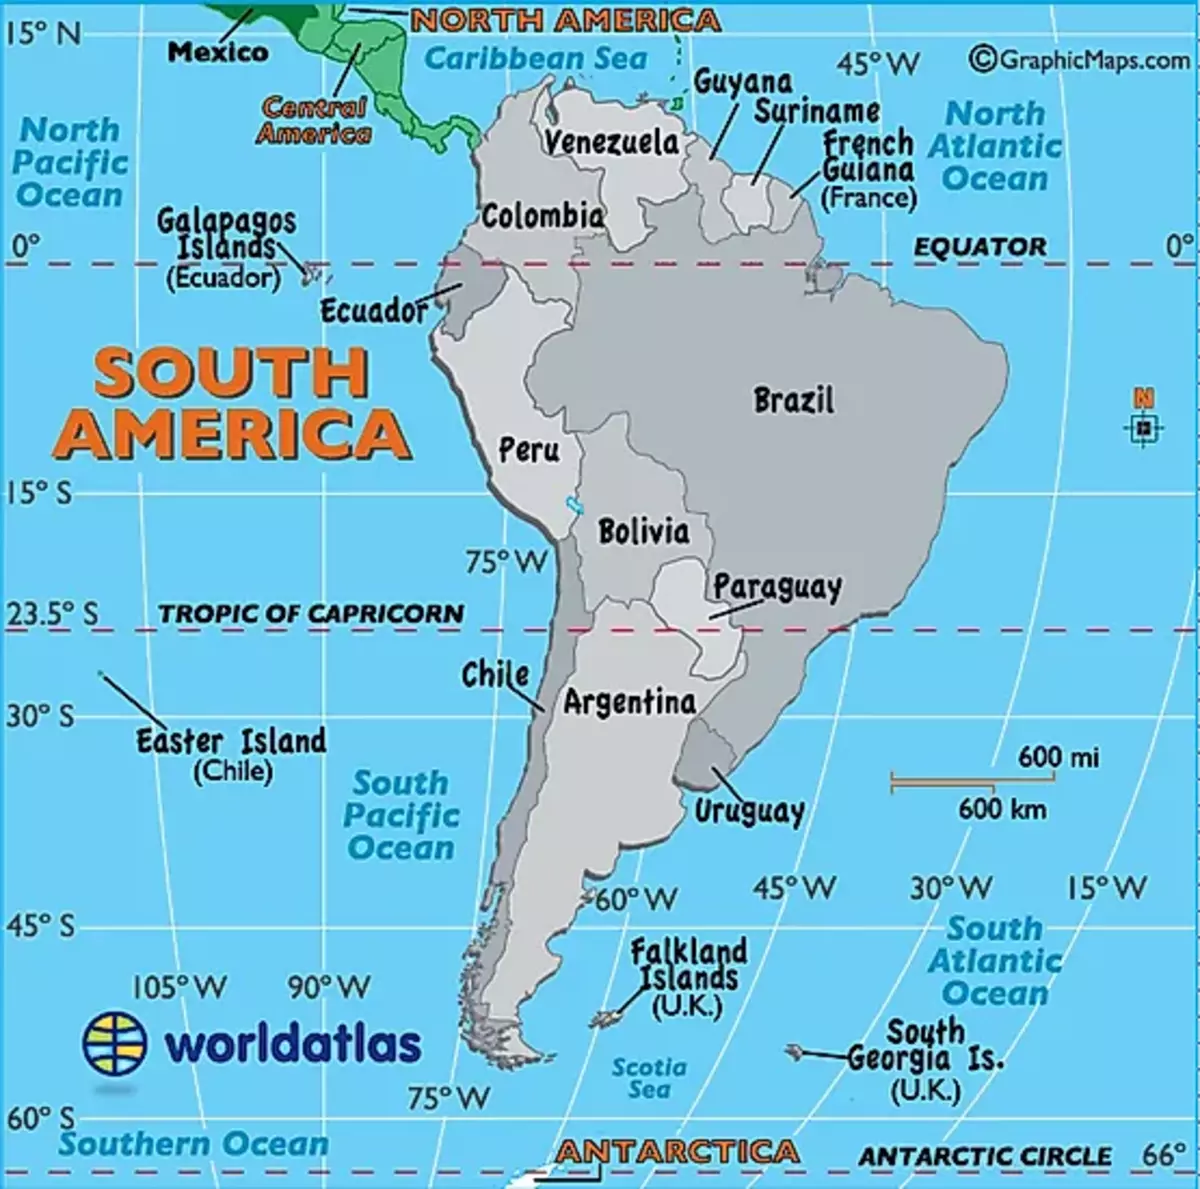 South America's Map